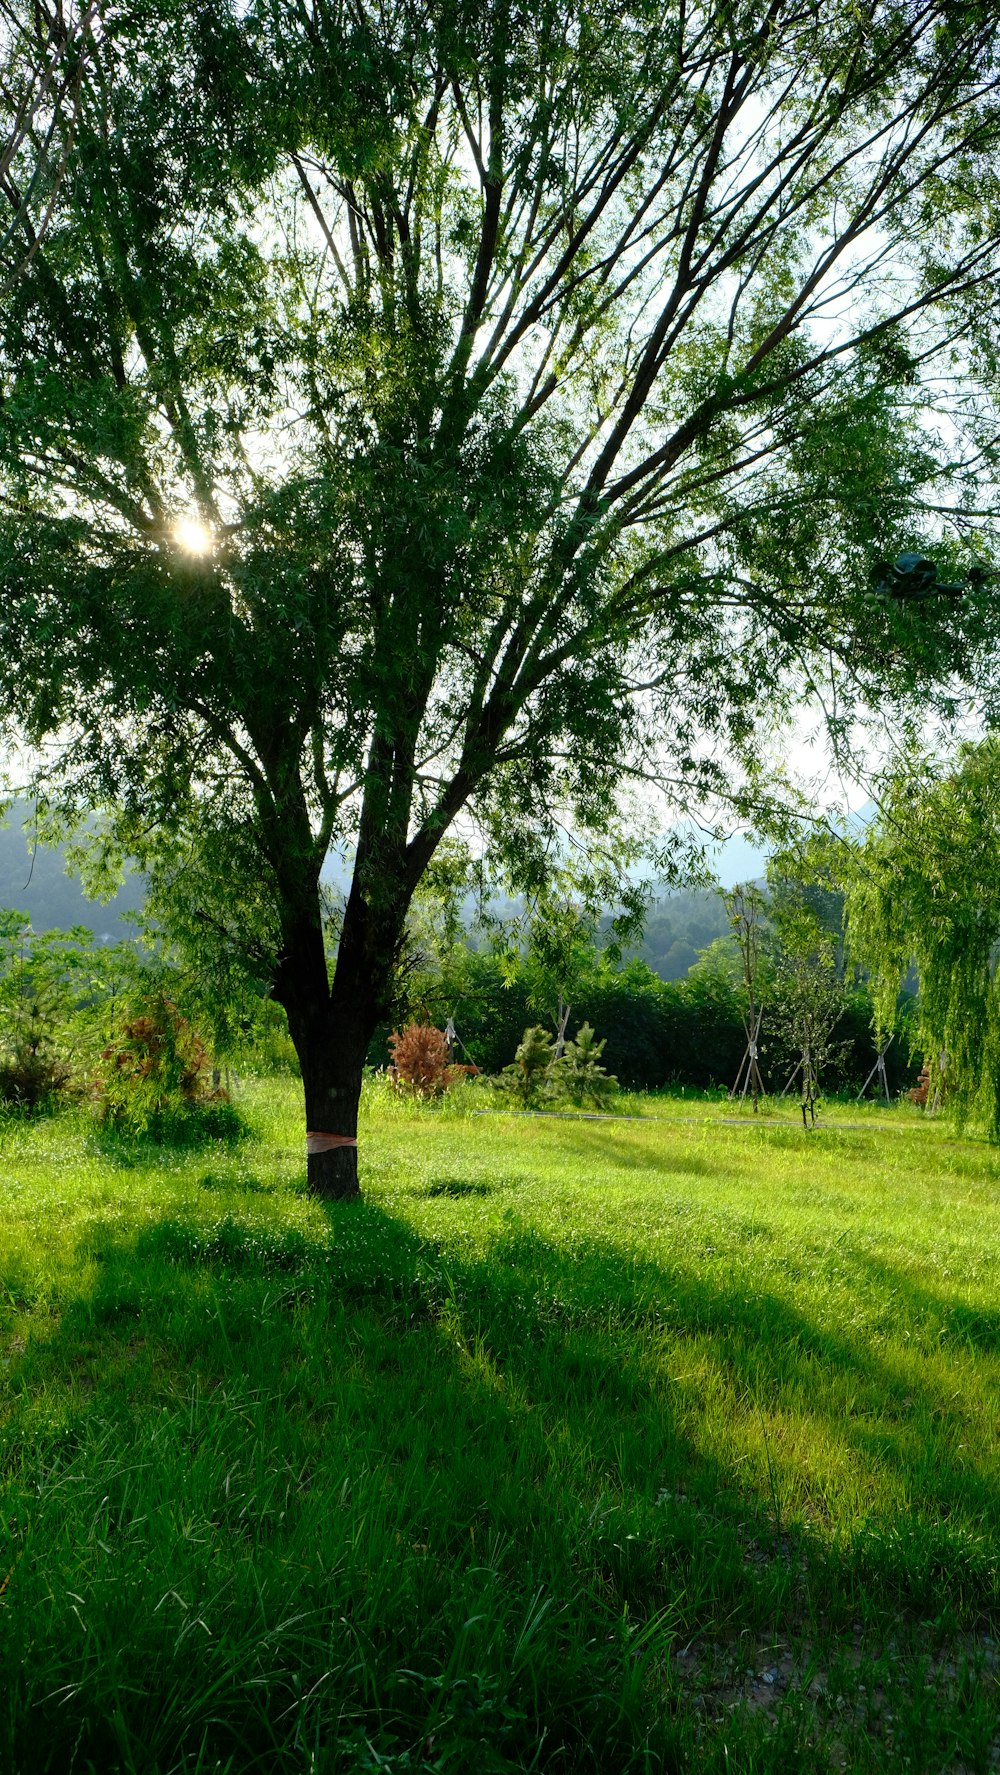 green grass field with green tree during daytime